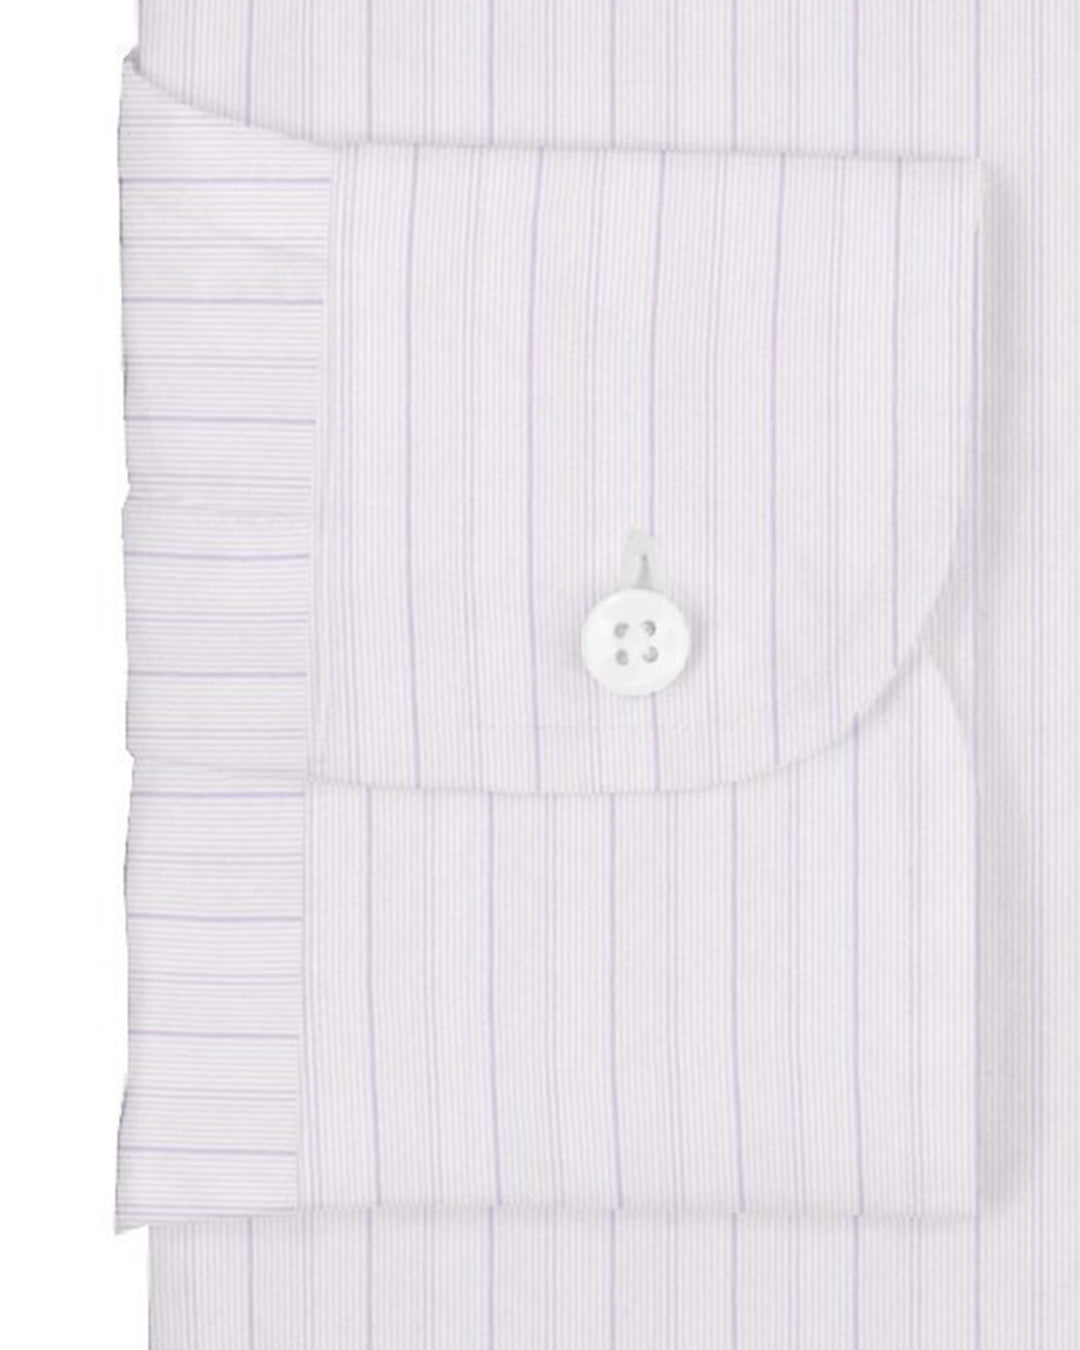 A Touch of Silk:Purple Pin Stripes on White: Natural Wrinkle Free